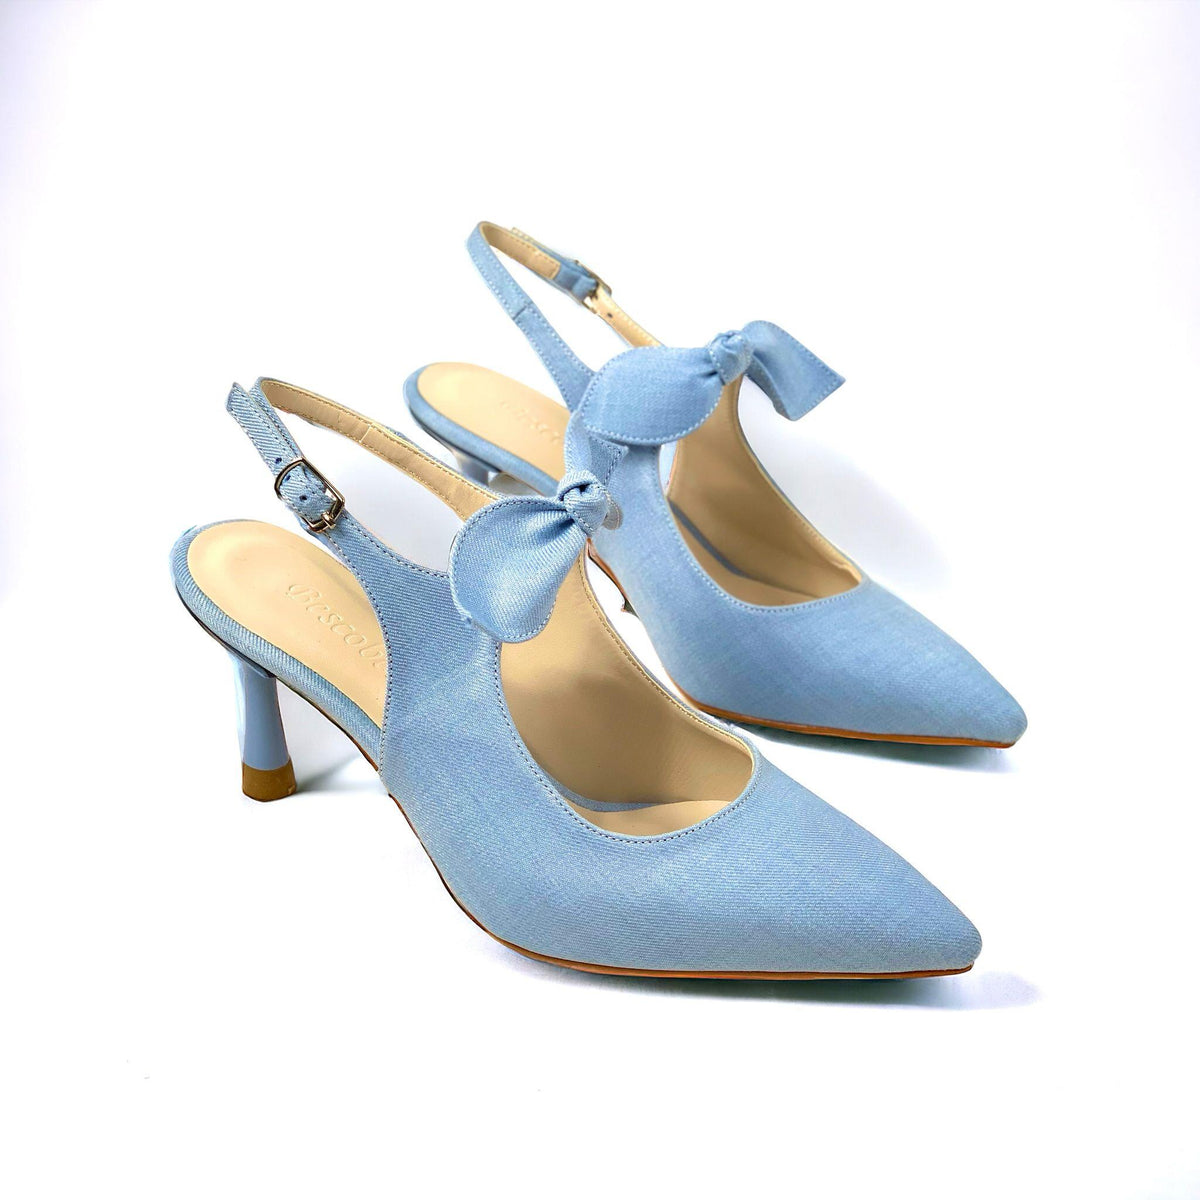 Women's Blue Denim Material Tanb Bow Detailed Heeled Pointed Toe Shoes 7 cm Heel - STREETMODE ™